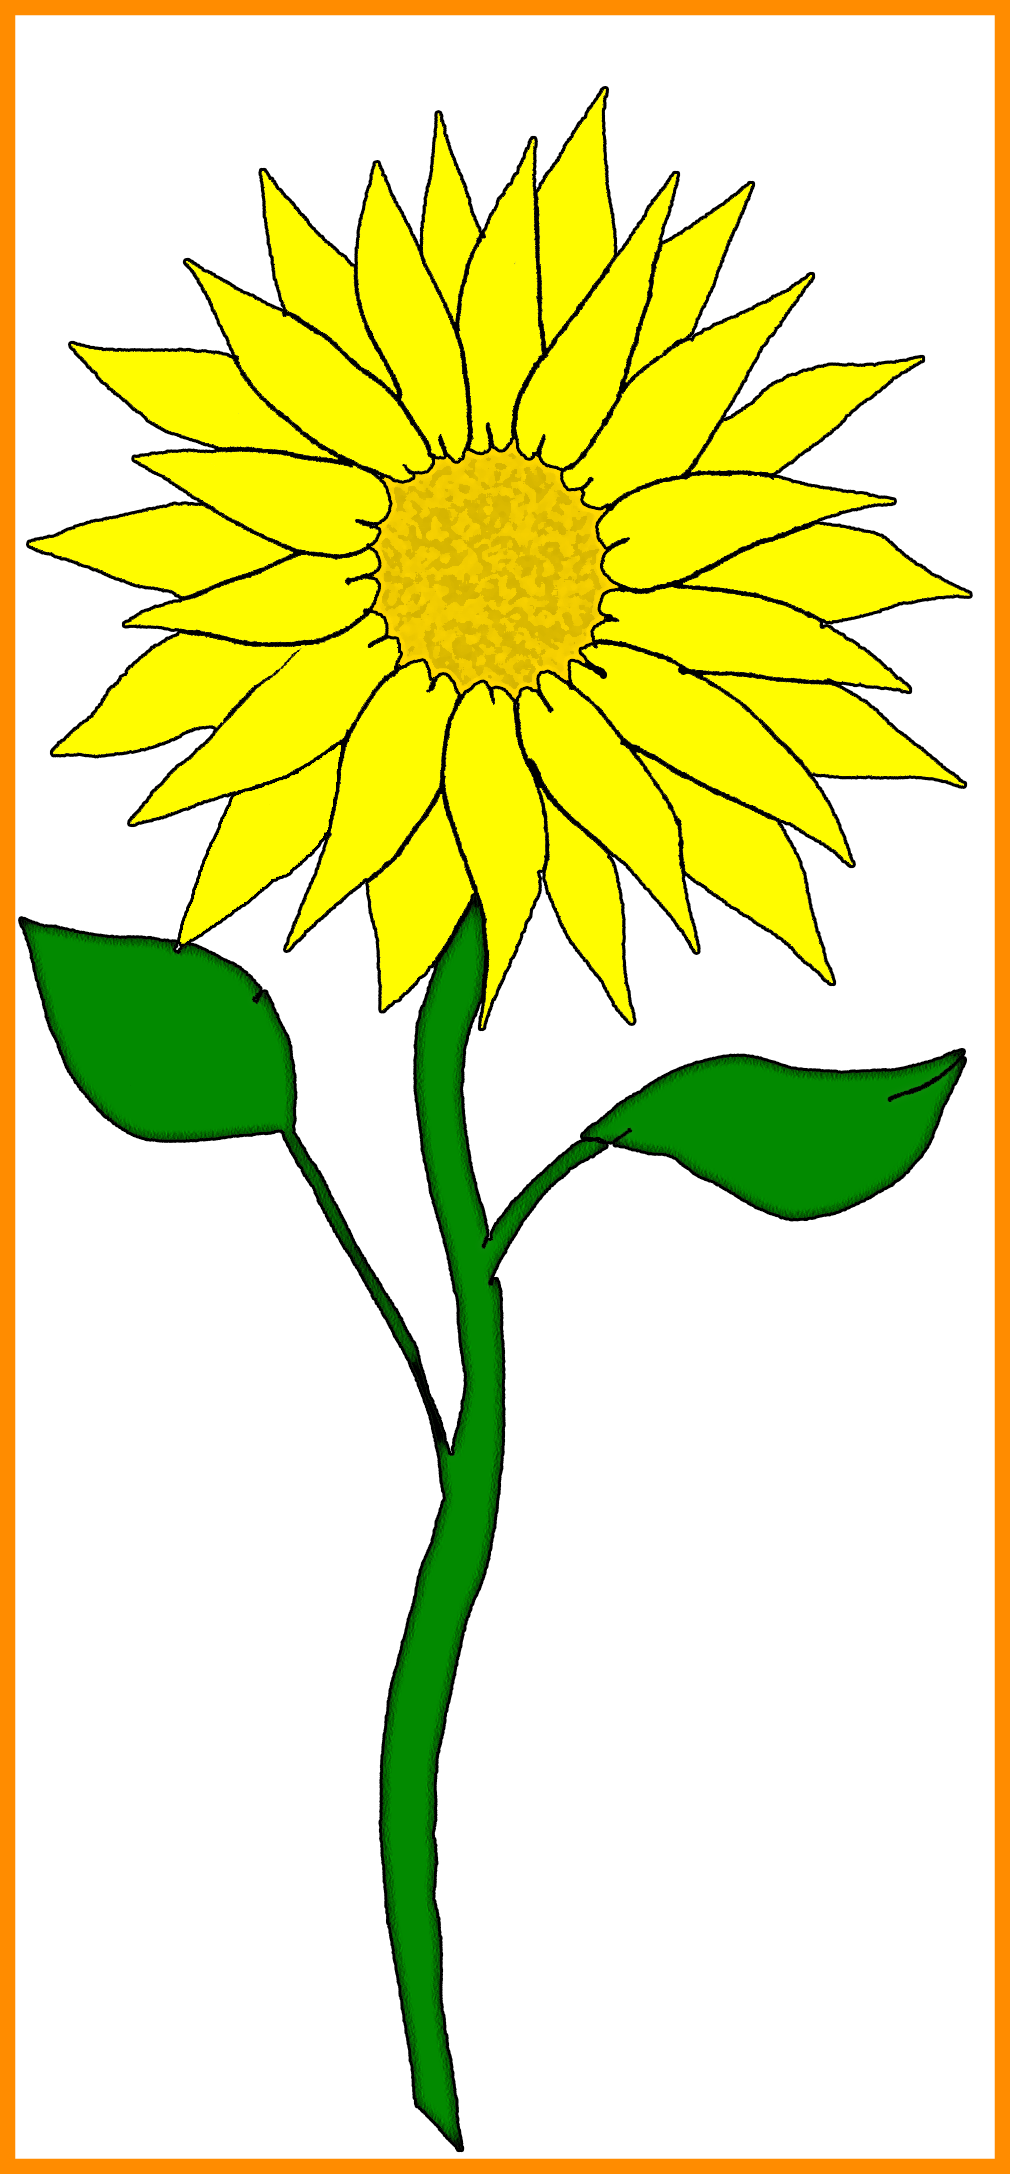 Download Stunning Flower Clipart Pict For Sunflower Frame Styles -  Sunflowers Clipar PNG Image with No Background 